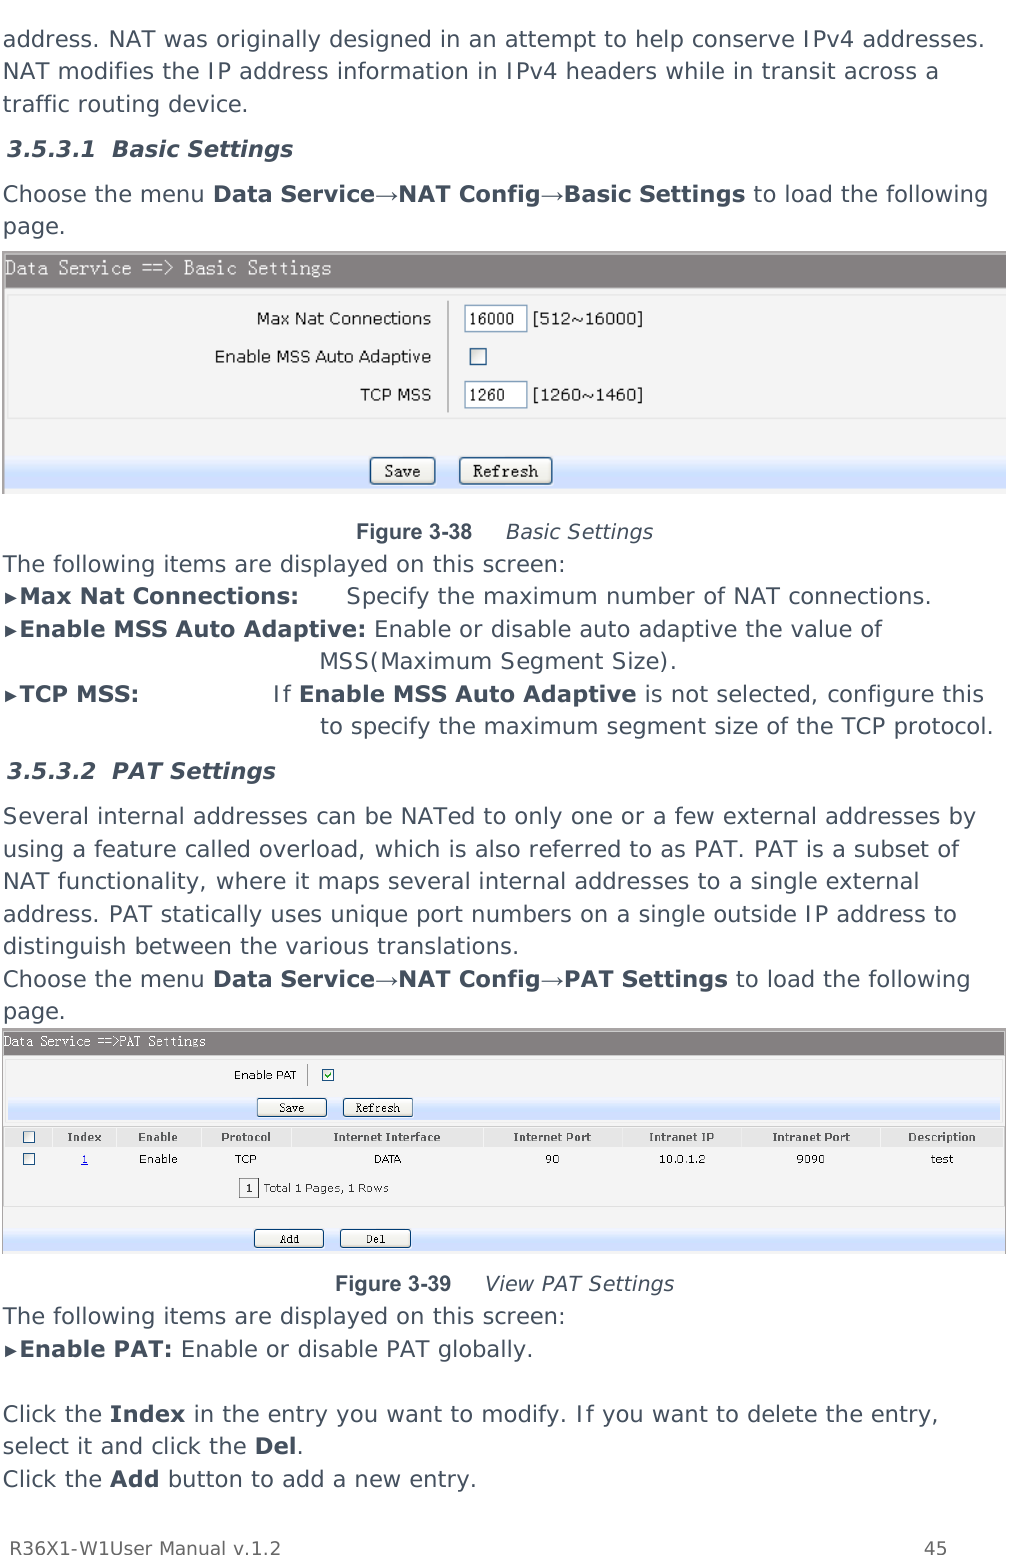           R36X1-W1User Manual v.1.2    45  address. NAT was originally designed in an attempt to help conserve IPv4 addresses. NAT modifies the IP address information in IPv4 headers while in transit across a traffic routing device. 3.5.3.1 Basic Settings Choose the menu Data Service→NAT Config→Basic Settings to load the following page.  Figure 3-38  Basic Settings The following items are displayed on this screen: ►Max Nat Connections:      Specify the maximum number of NAT connections. ►Enable MSS Auto Adaptive: Enable or disable auto adaptive the value of MSS(Maximum Segment Size). ►TCP MSS:                 If Enable MSS Auto Adaptive is not selected, configure this to specify the maximum segment size of the TCP protocol. 3.5.3.2 PAT Settings Several internal addresses can be NATed to only one or a few external addresses by using a feature called overload, which is also referred to as PAT. PAT is a subset of NAT functionality, where it maps several internal addresses to a single external address. PAT statically uses unique port numbers on a single outside IP address to distinguish between the various translations. Choose the menu Data Service→NAT Config→PAT Settings to load the following page.  Figure 3-39  View PAT Settings The following items are displayed on this screen: ►Enable PAT: Enable or disable PAT globally.  Click the Index in the entry you want to modify. If you want to delete the entry, select it and click the Del. Click the Add button to add a new entry. 